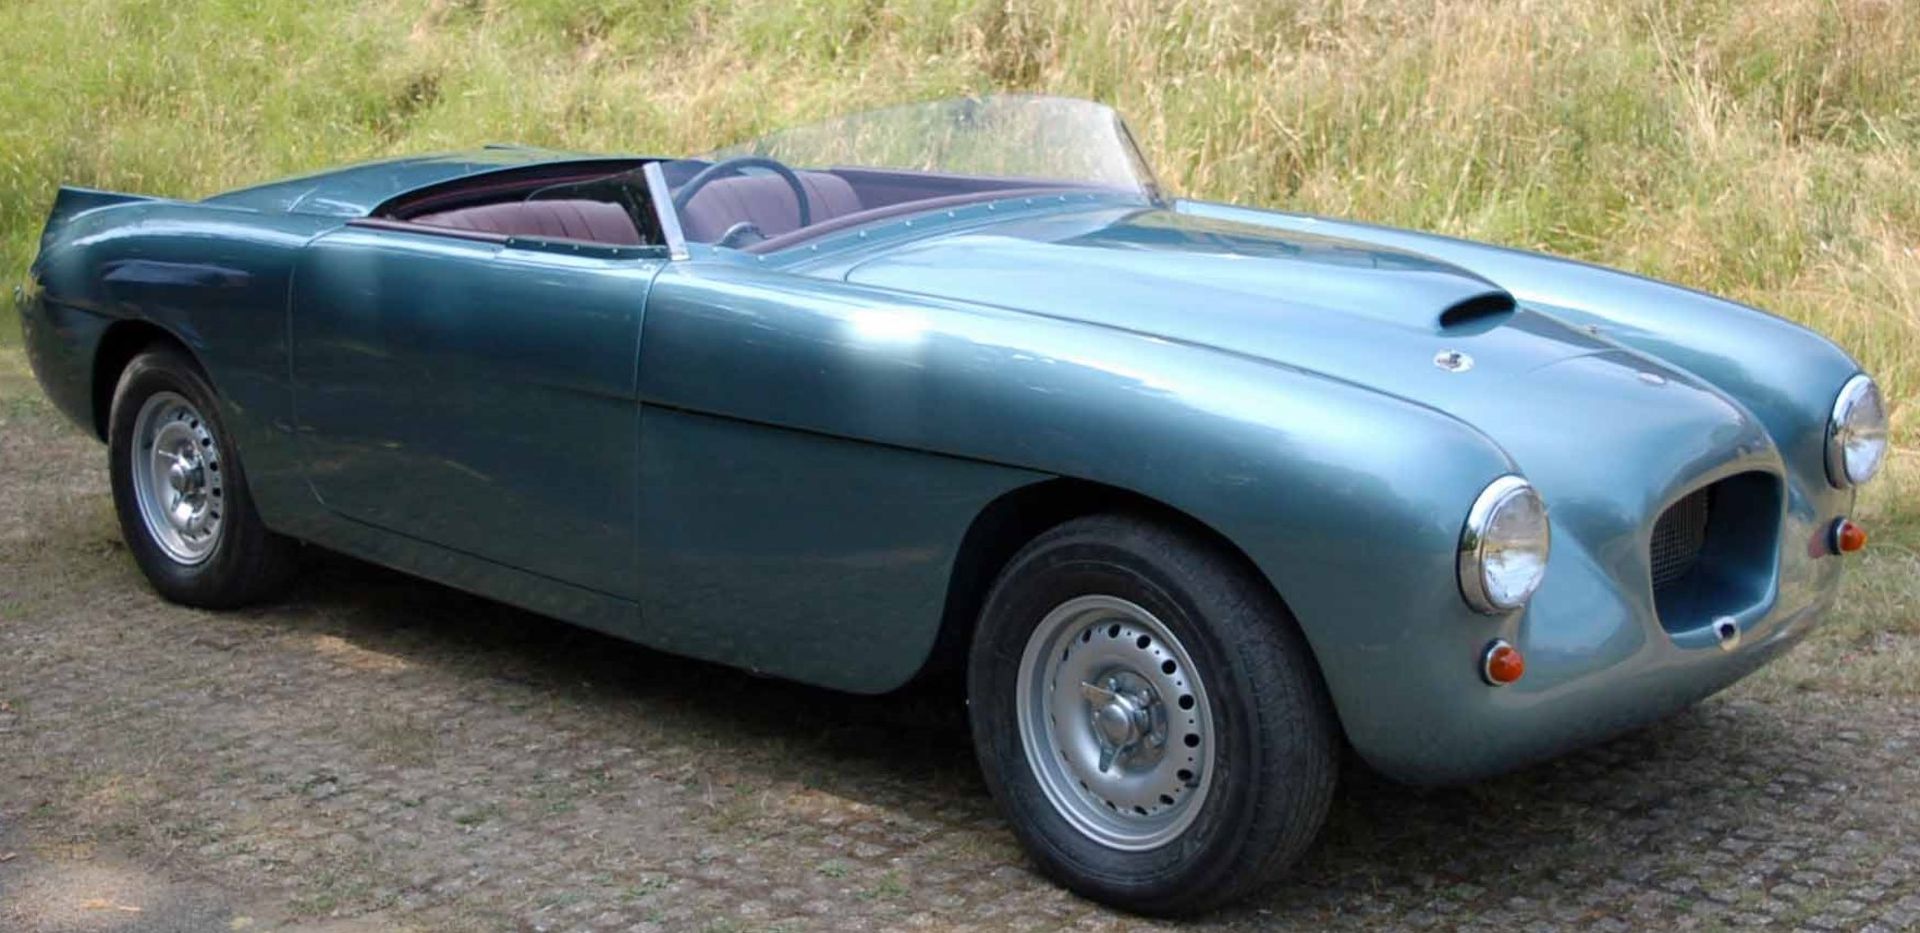 The 1964 Bristol 409 Bullet Speedster. The original Bullet, this car started life as a Bristol 409 - Image 8 of 17